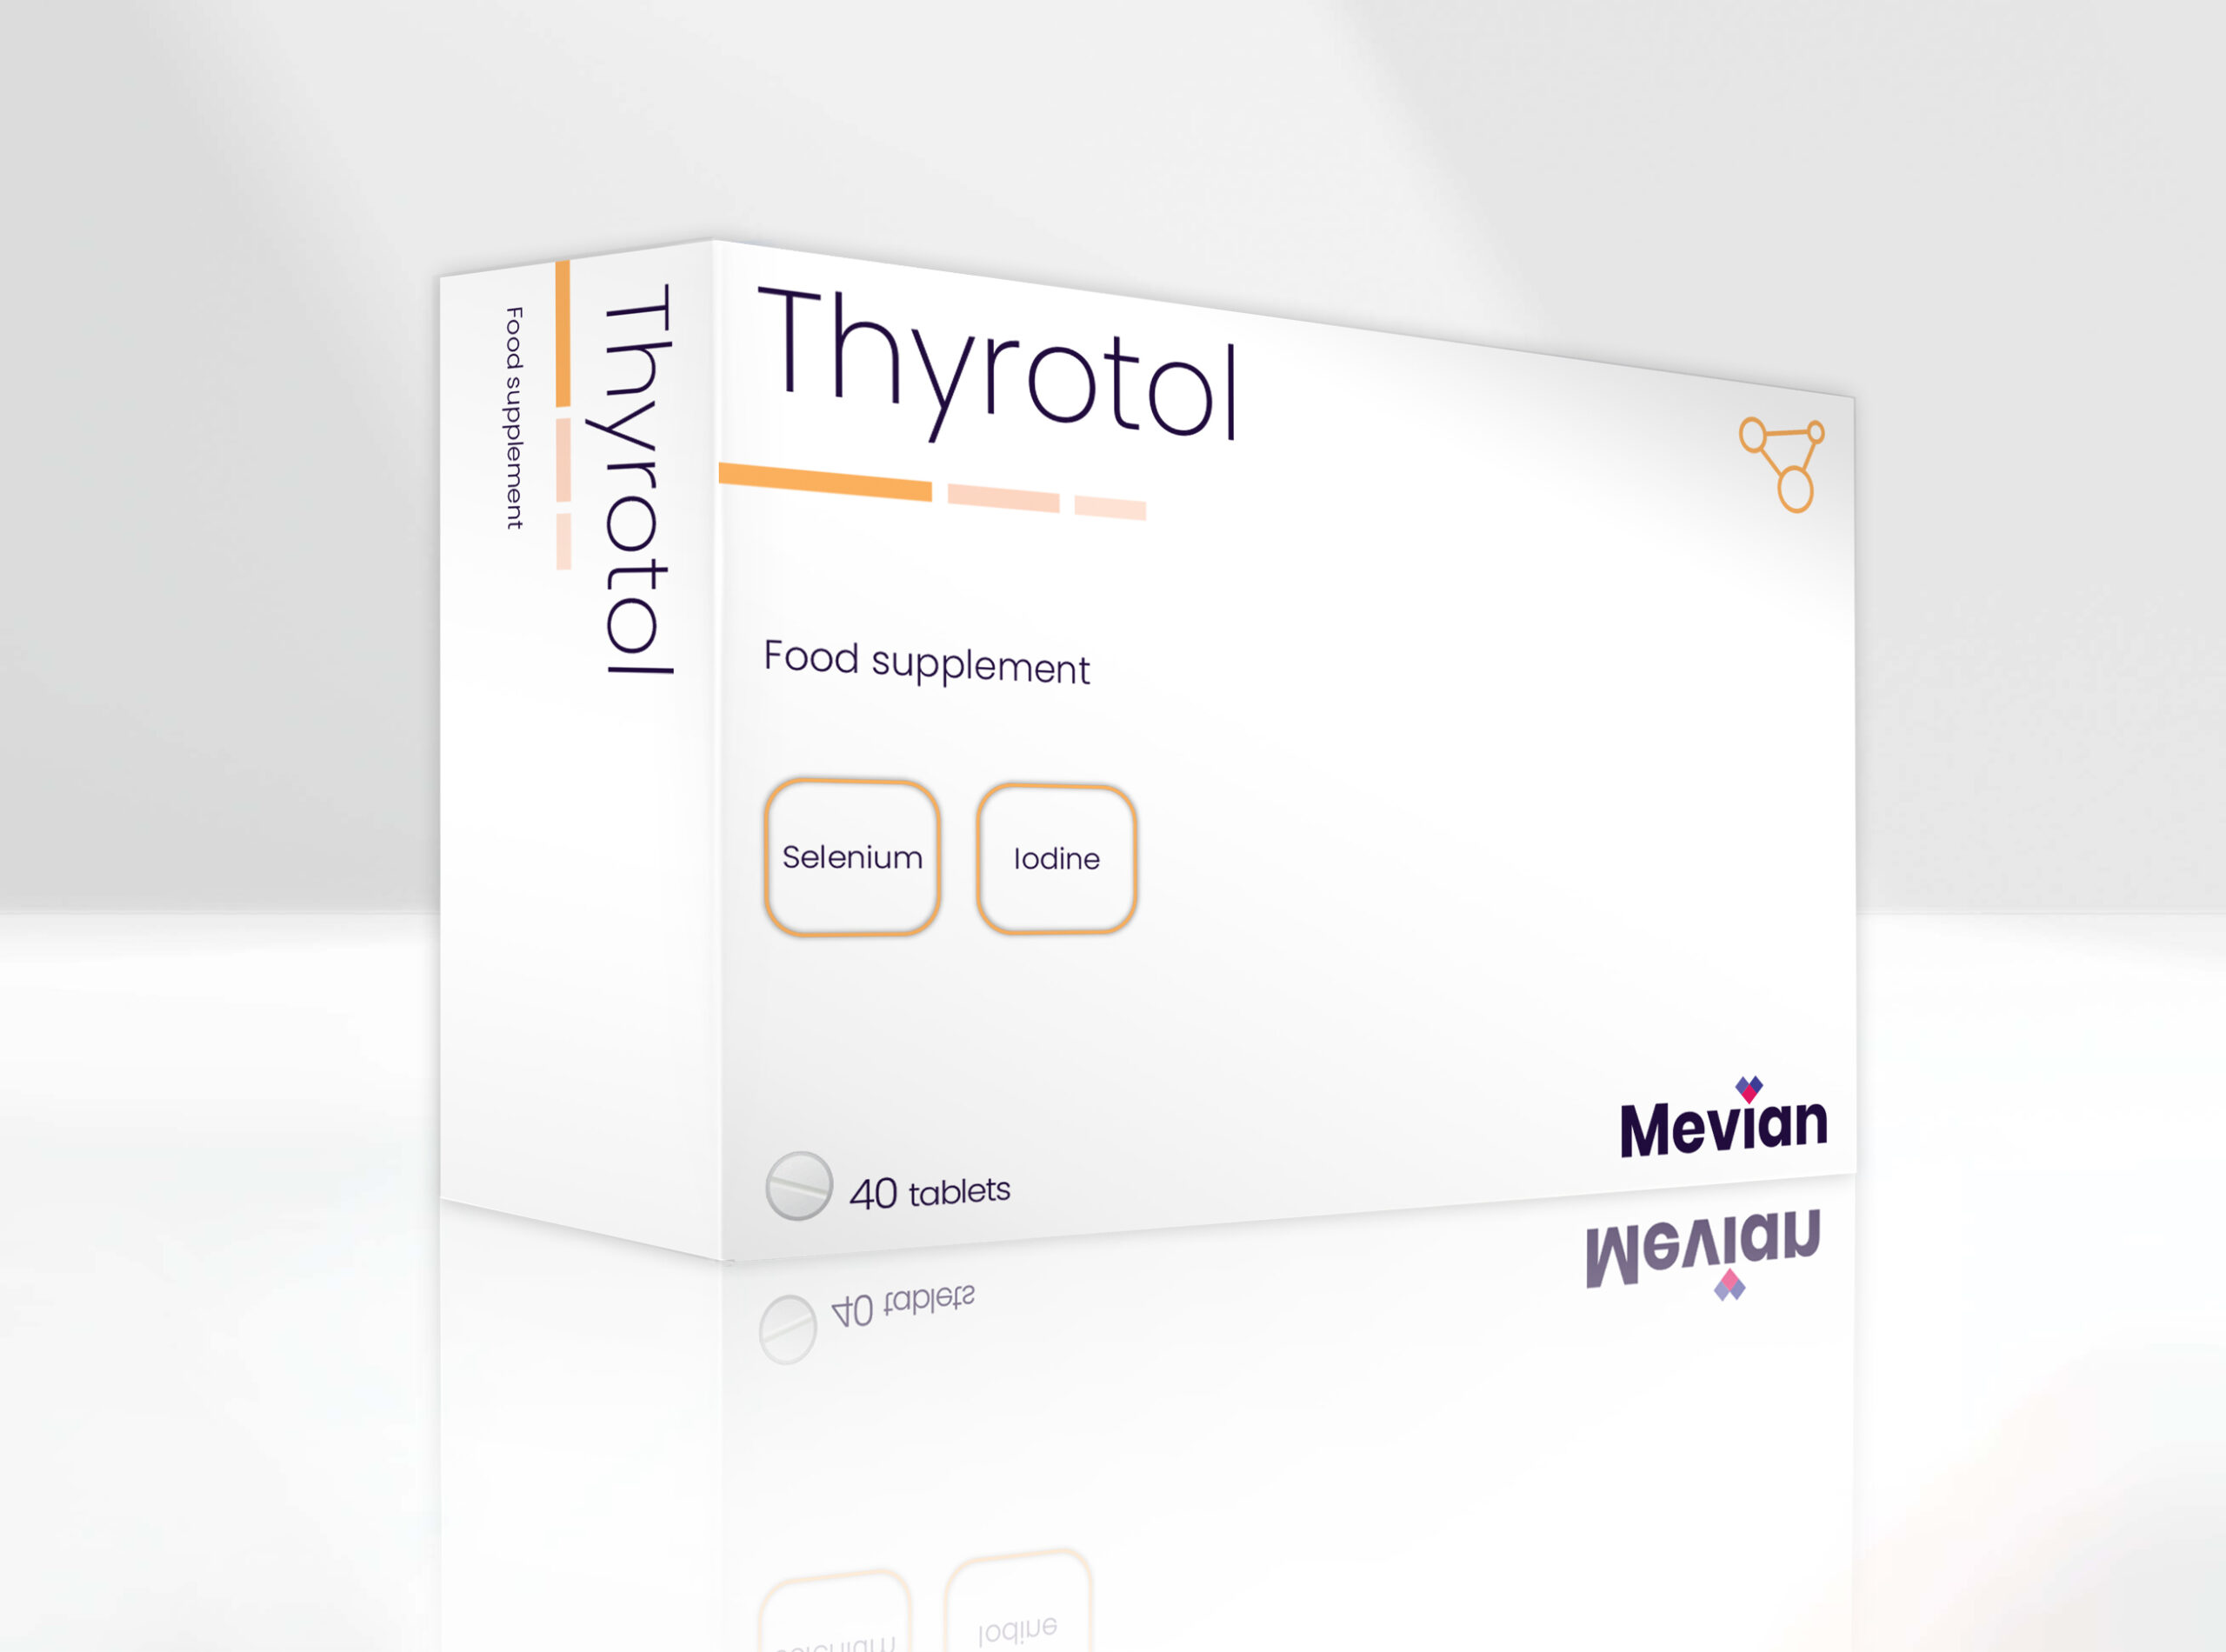 Thyrotol is ideal for normal thyroid and hormone function, energy metabolism, nervous system function, and cognitive function.